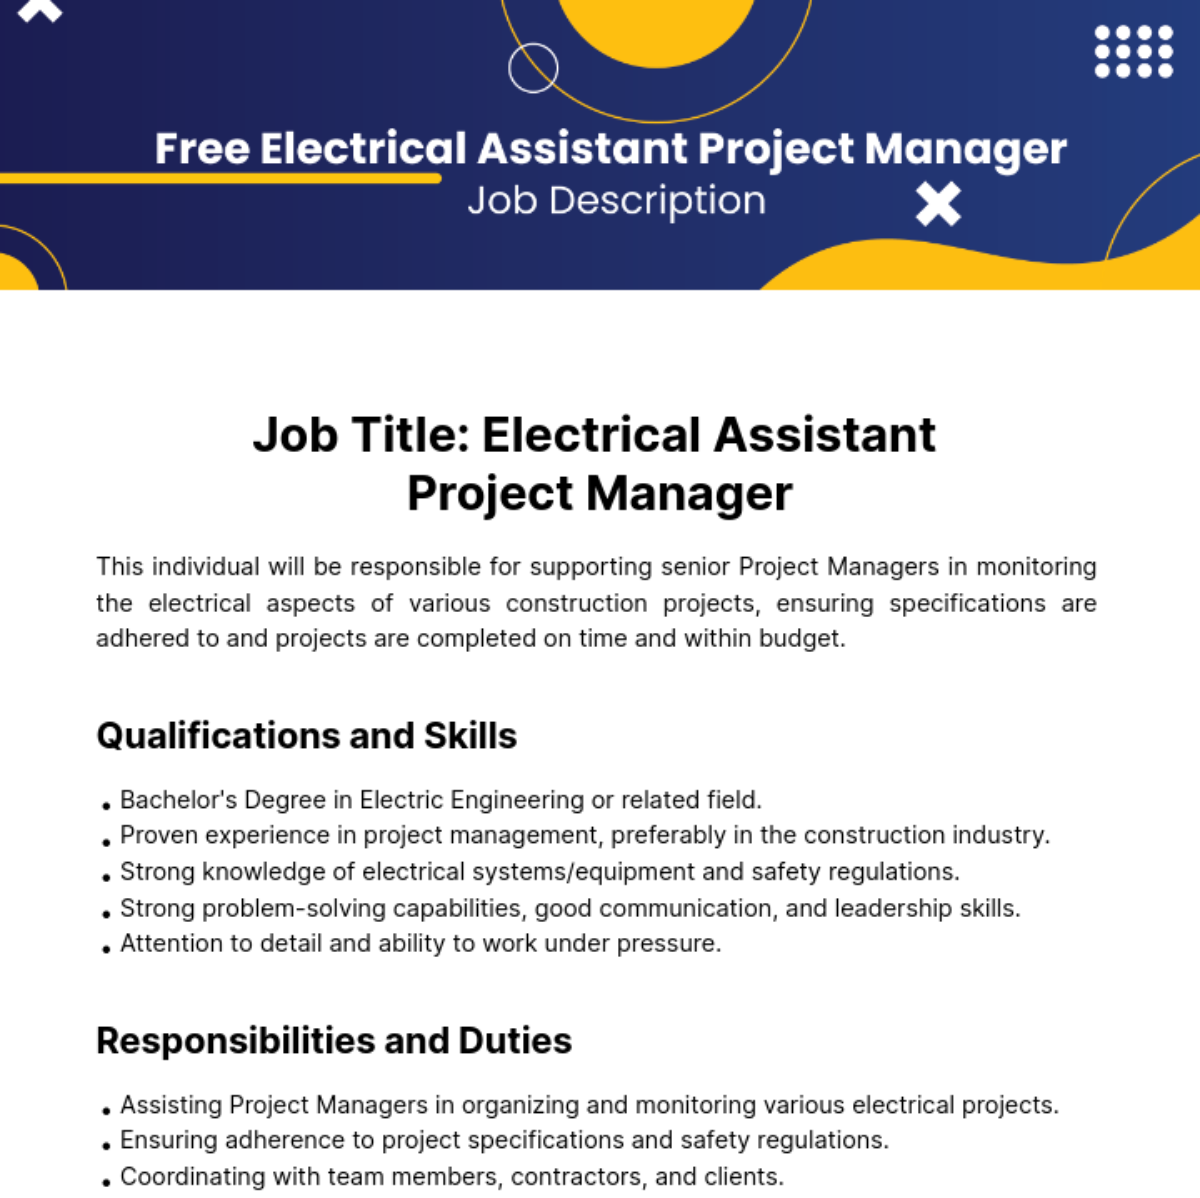 Free Electrical Assistant Project Manager Job Description Template